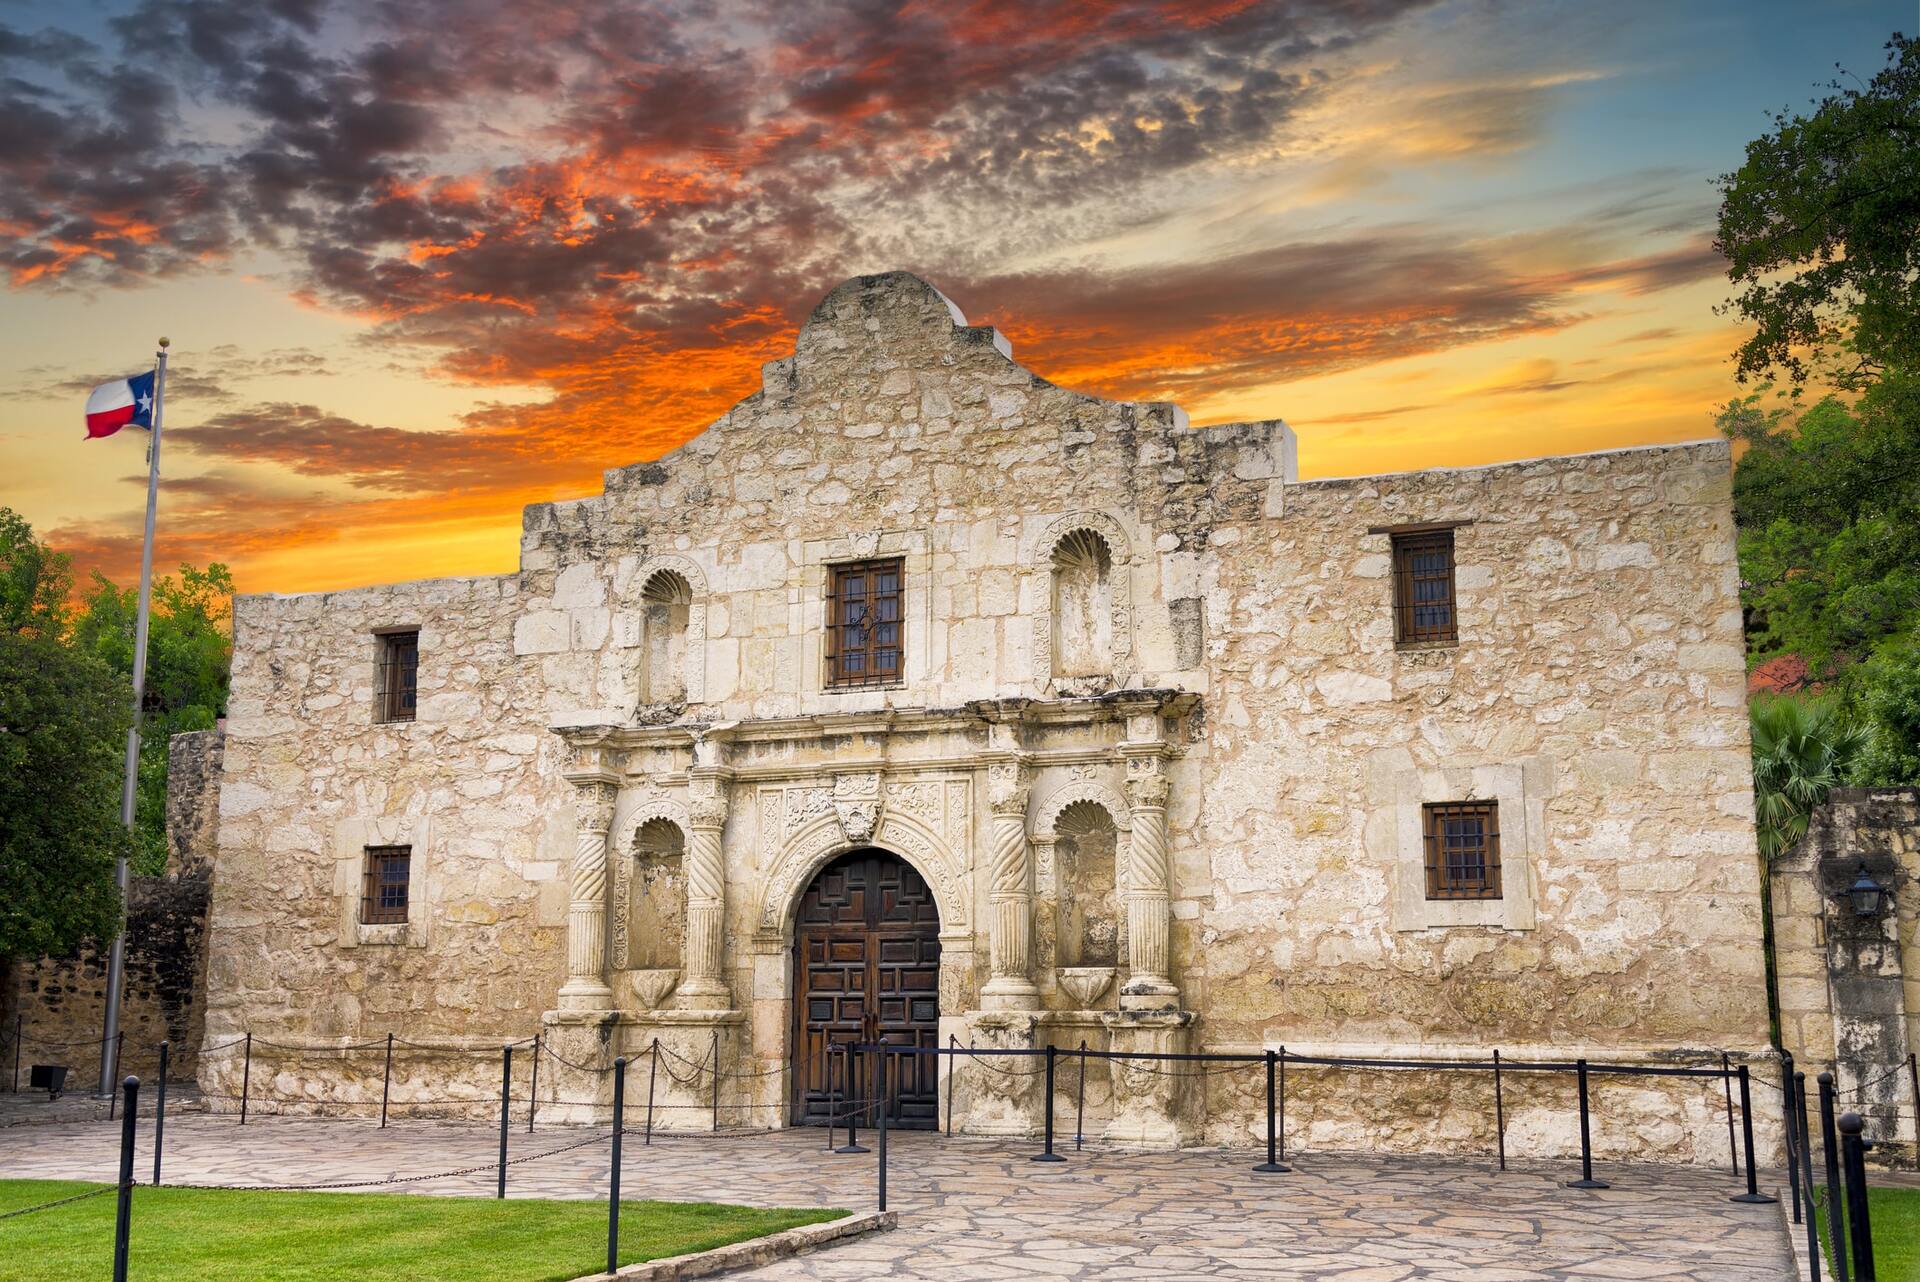 Battle of the Alamo: A Turning Point in Texas History